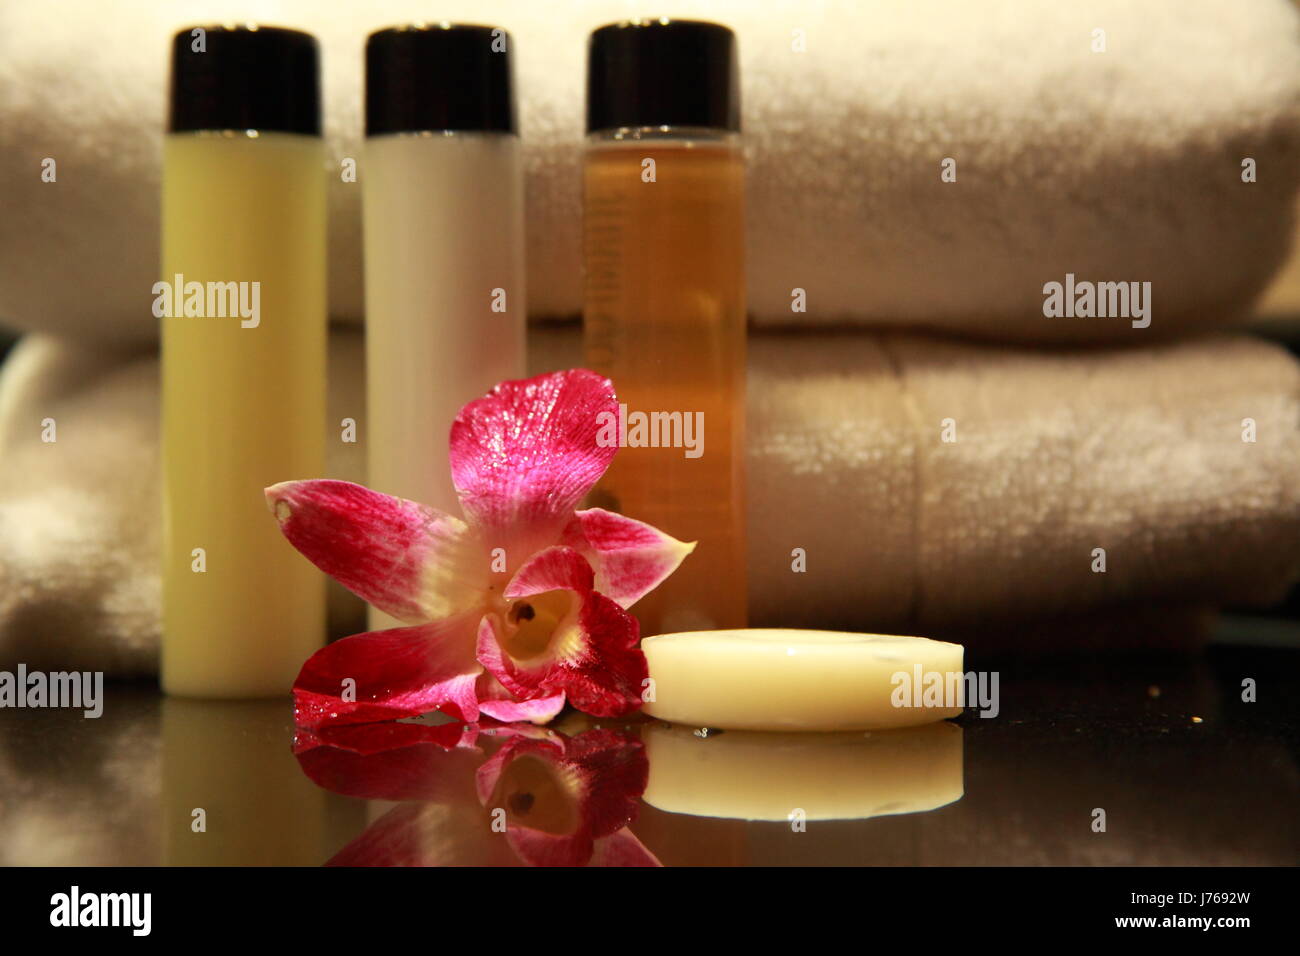 flower plant towel soap cosmetic amenities bathroom spa mineral spring Stock Photo